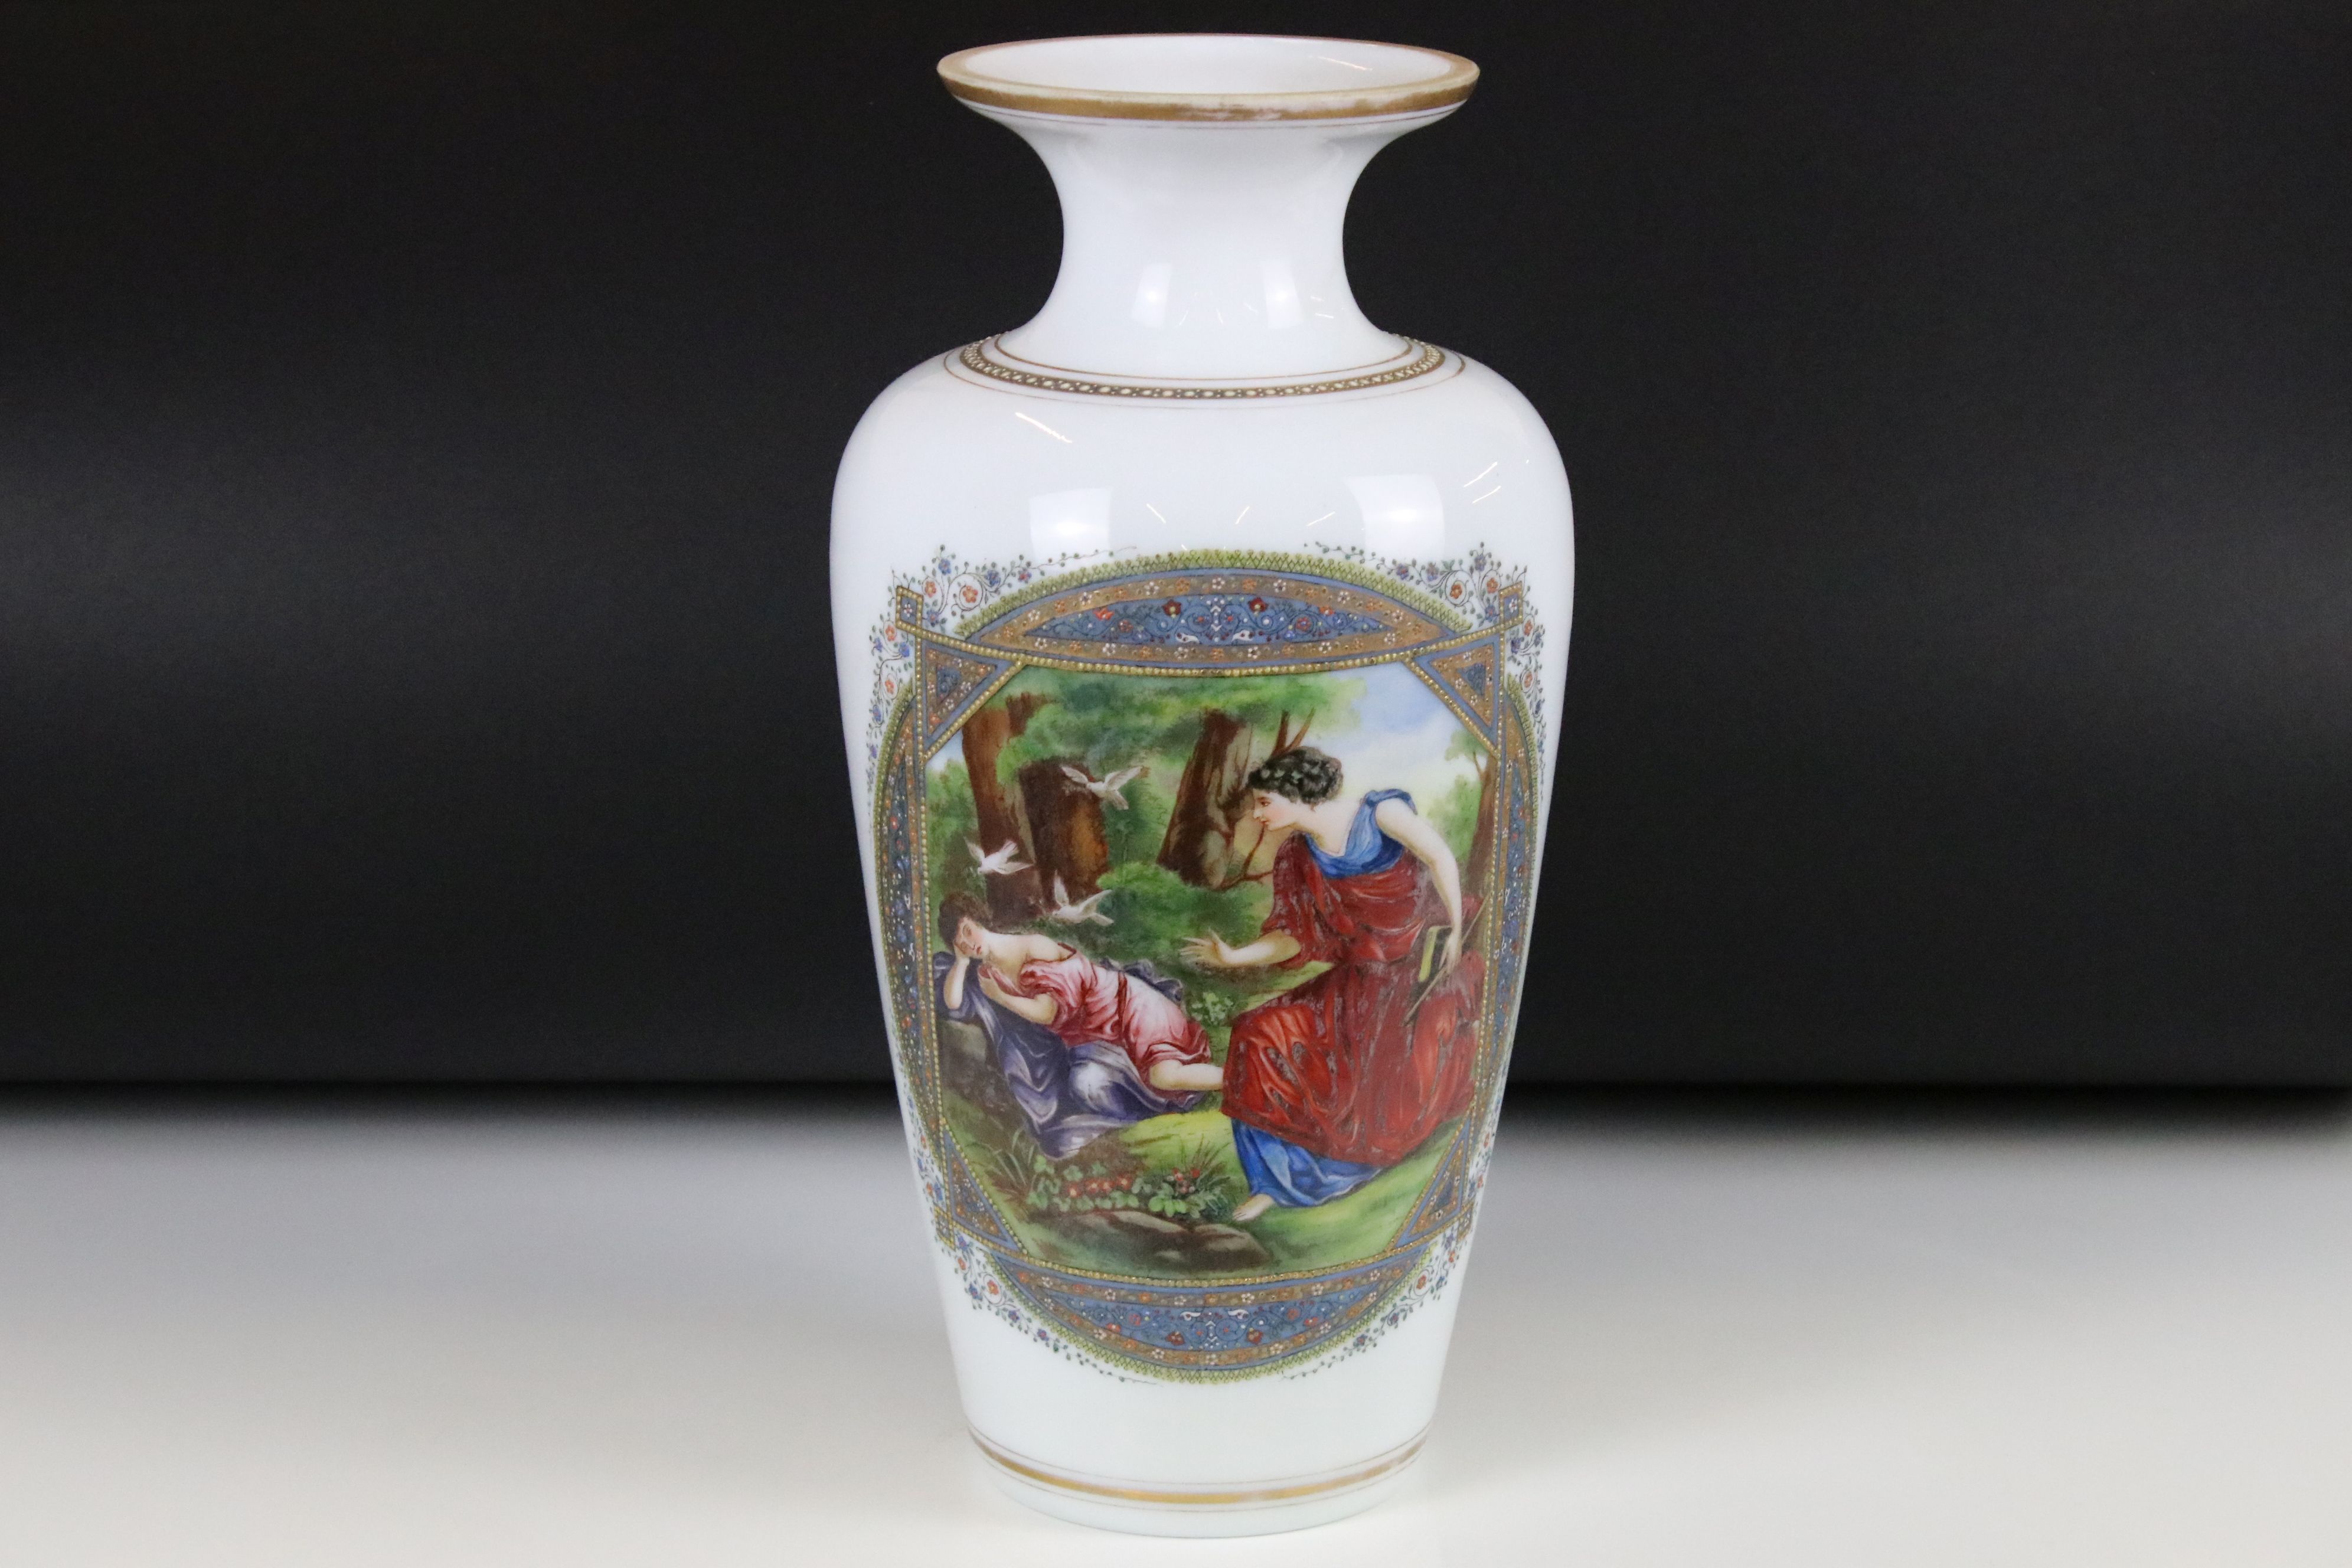 Large 19th century Opaque Glass Vase decorated with a panel of two classical figures in a woodland